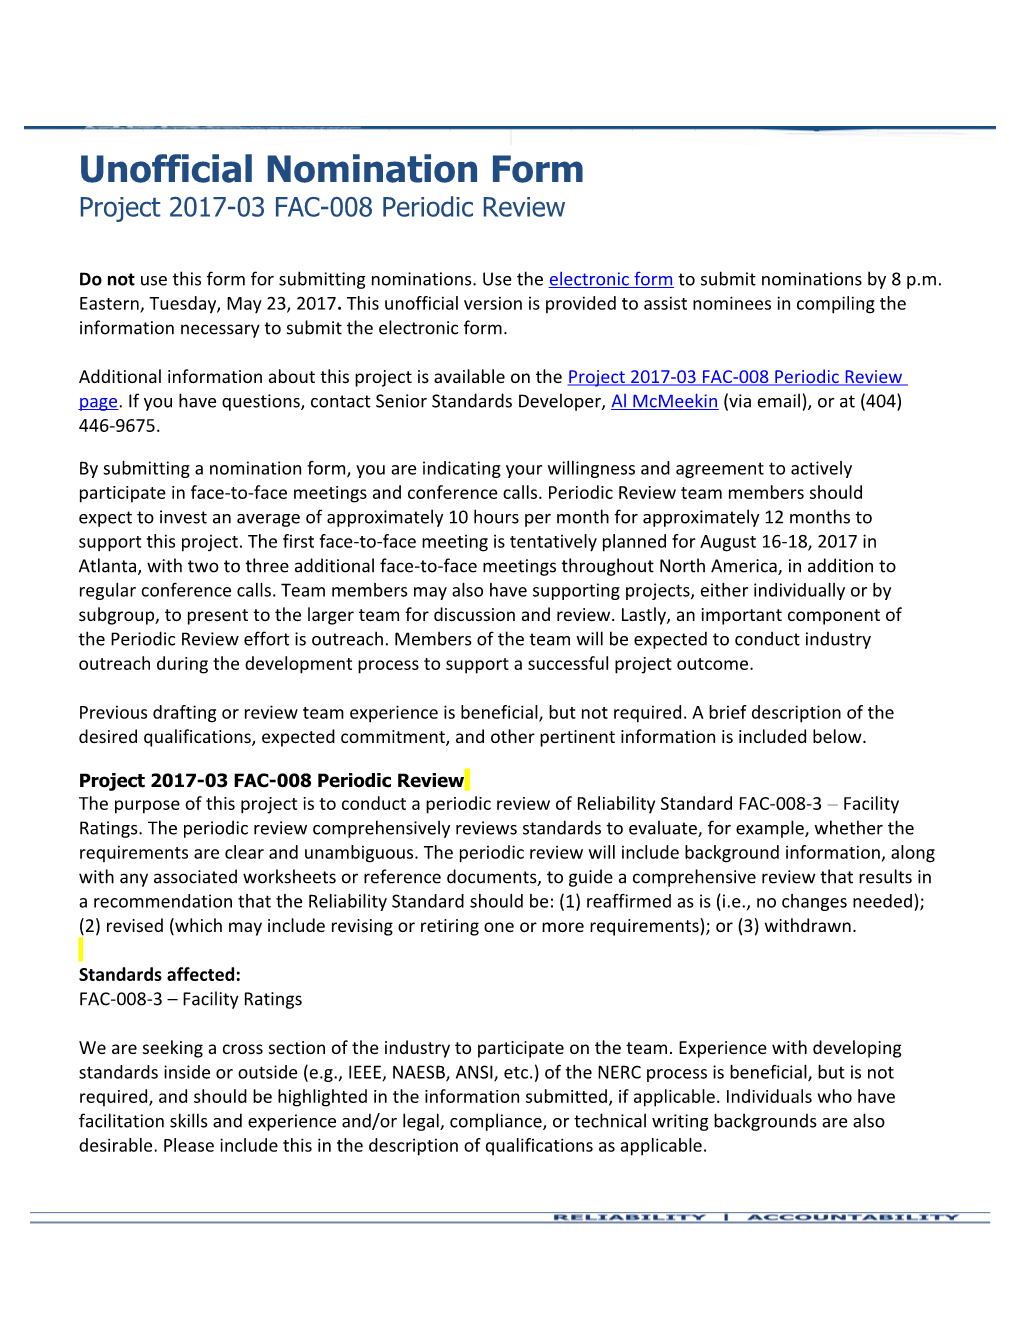 Unofficial Nomination Form Project 2017-03FAC-008 Periodic Review